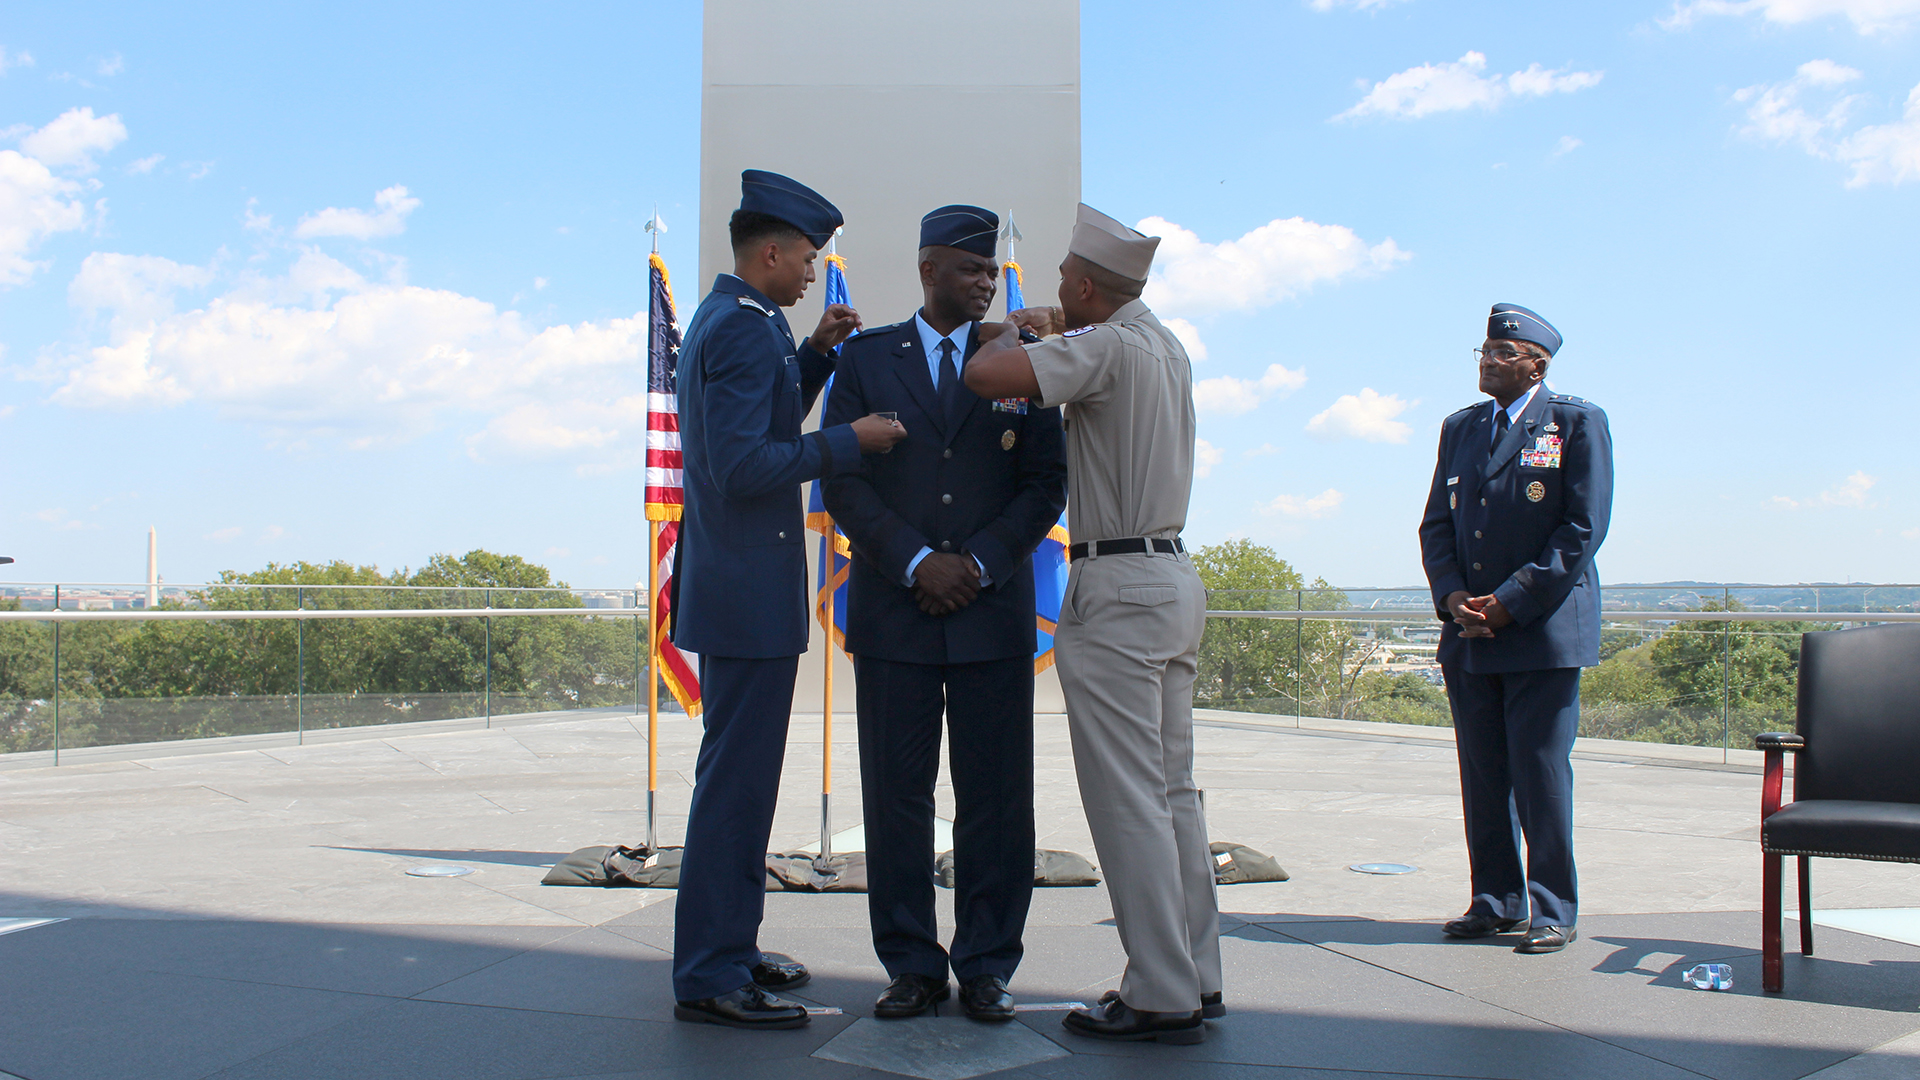 Brig. Gen. Alfred K. Flowers, Jr. (center), Air Force Medical Service Manpower, Personnel and Resources director, gets his brigadier general rank pinned